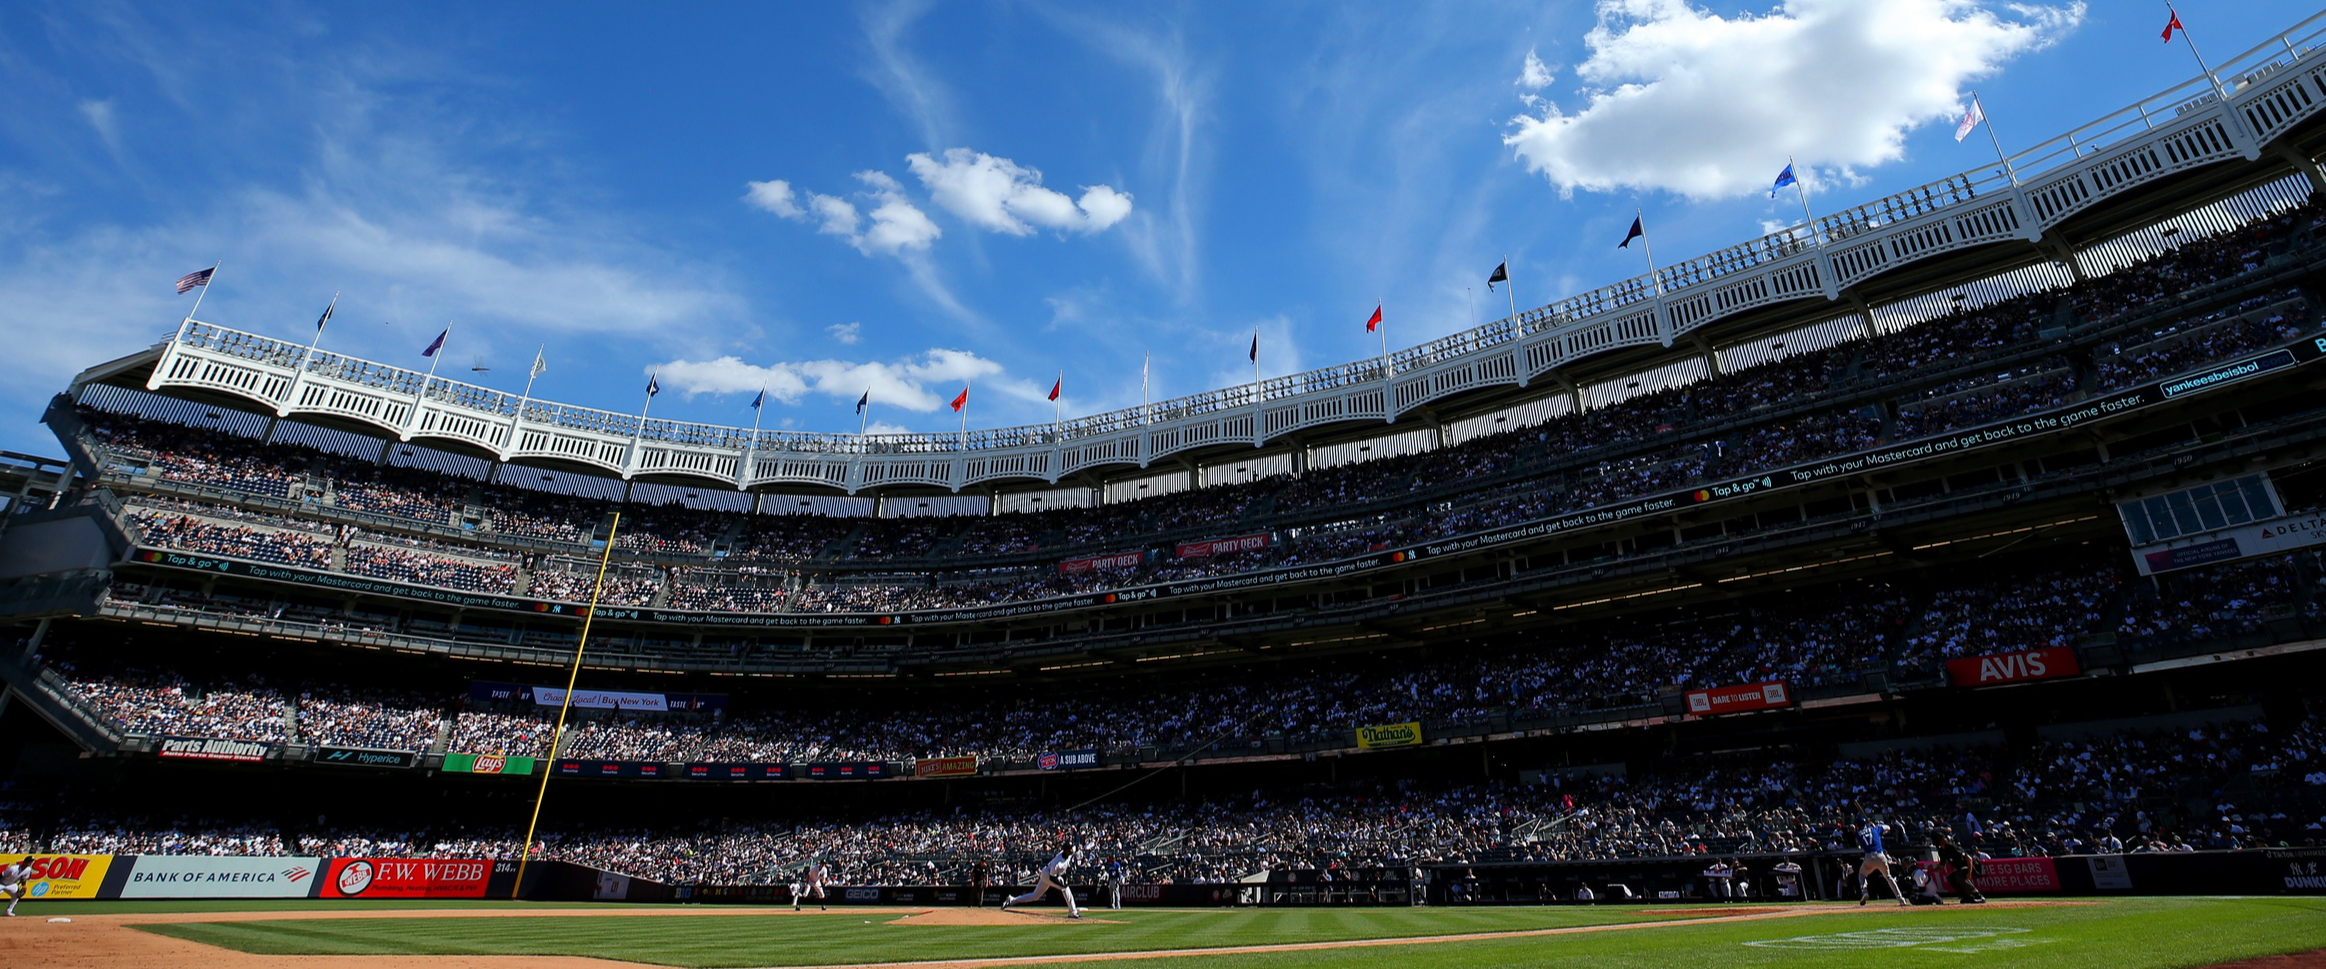 MLB teams are scaring fans away with exorbitant ticket prices